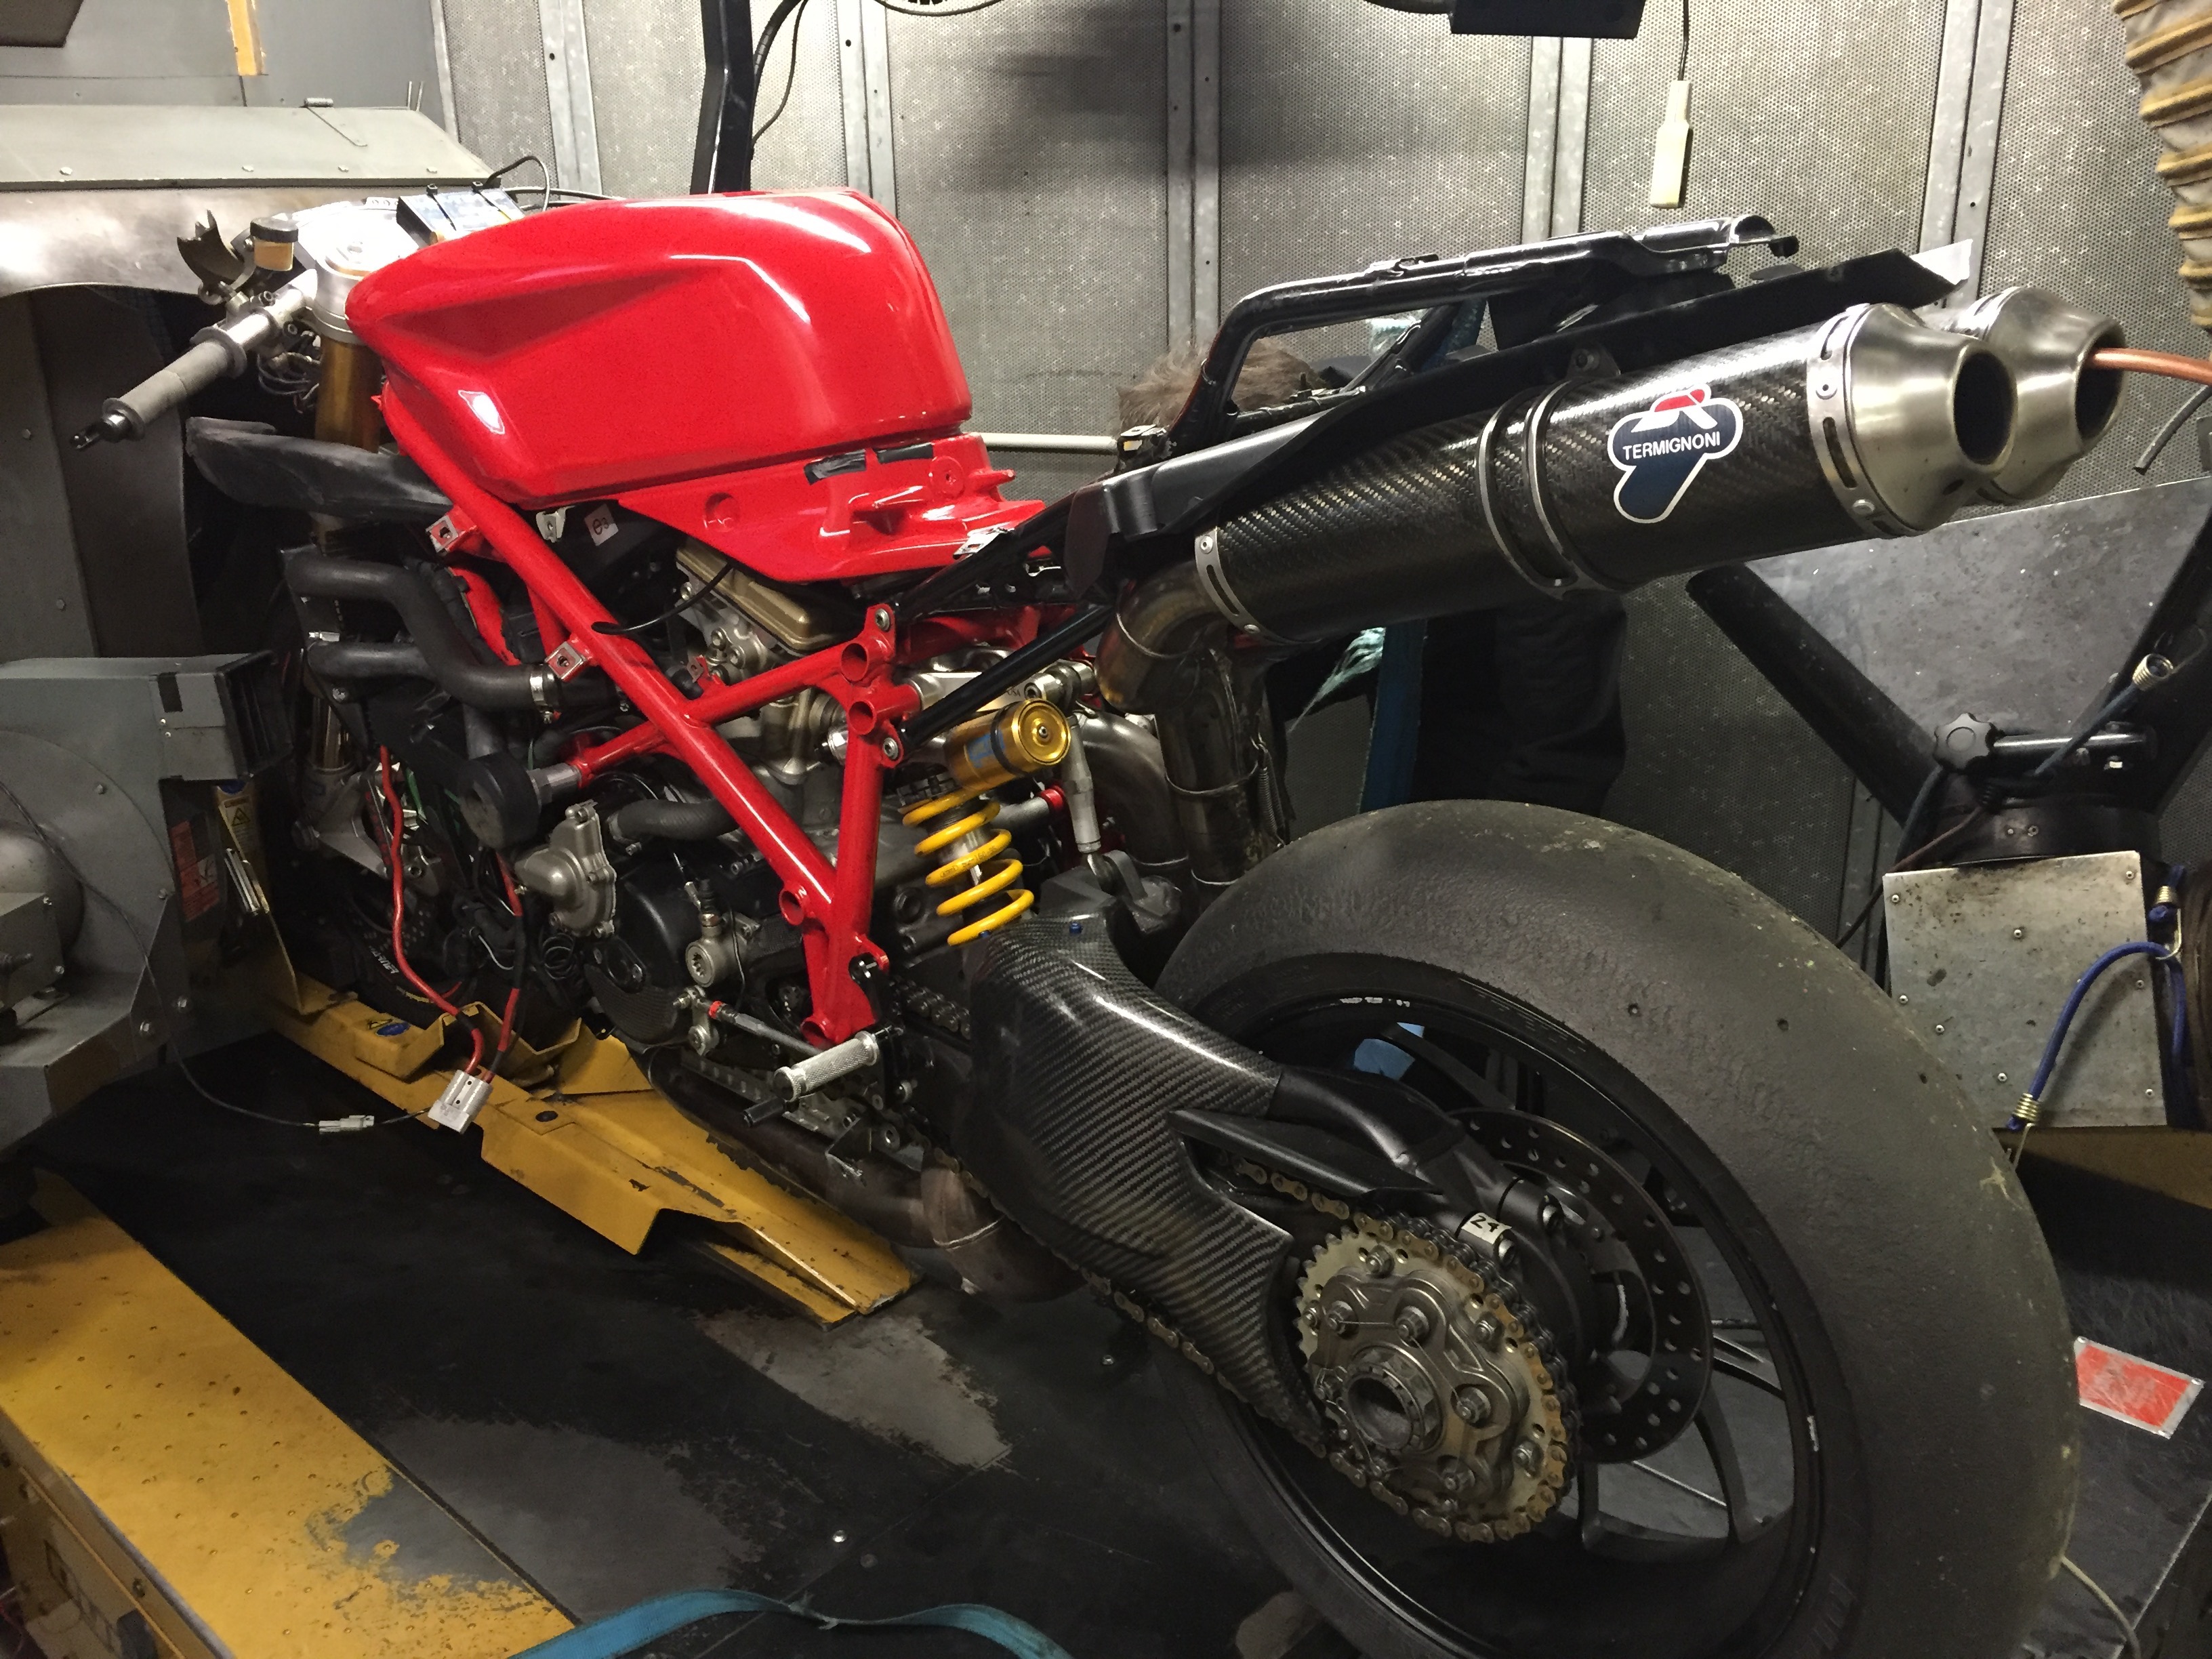 Race Ducati 1198R ECU swap and chassis upgrades taking bike to next level of handling ability